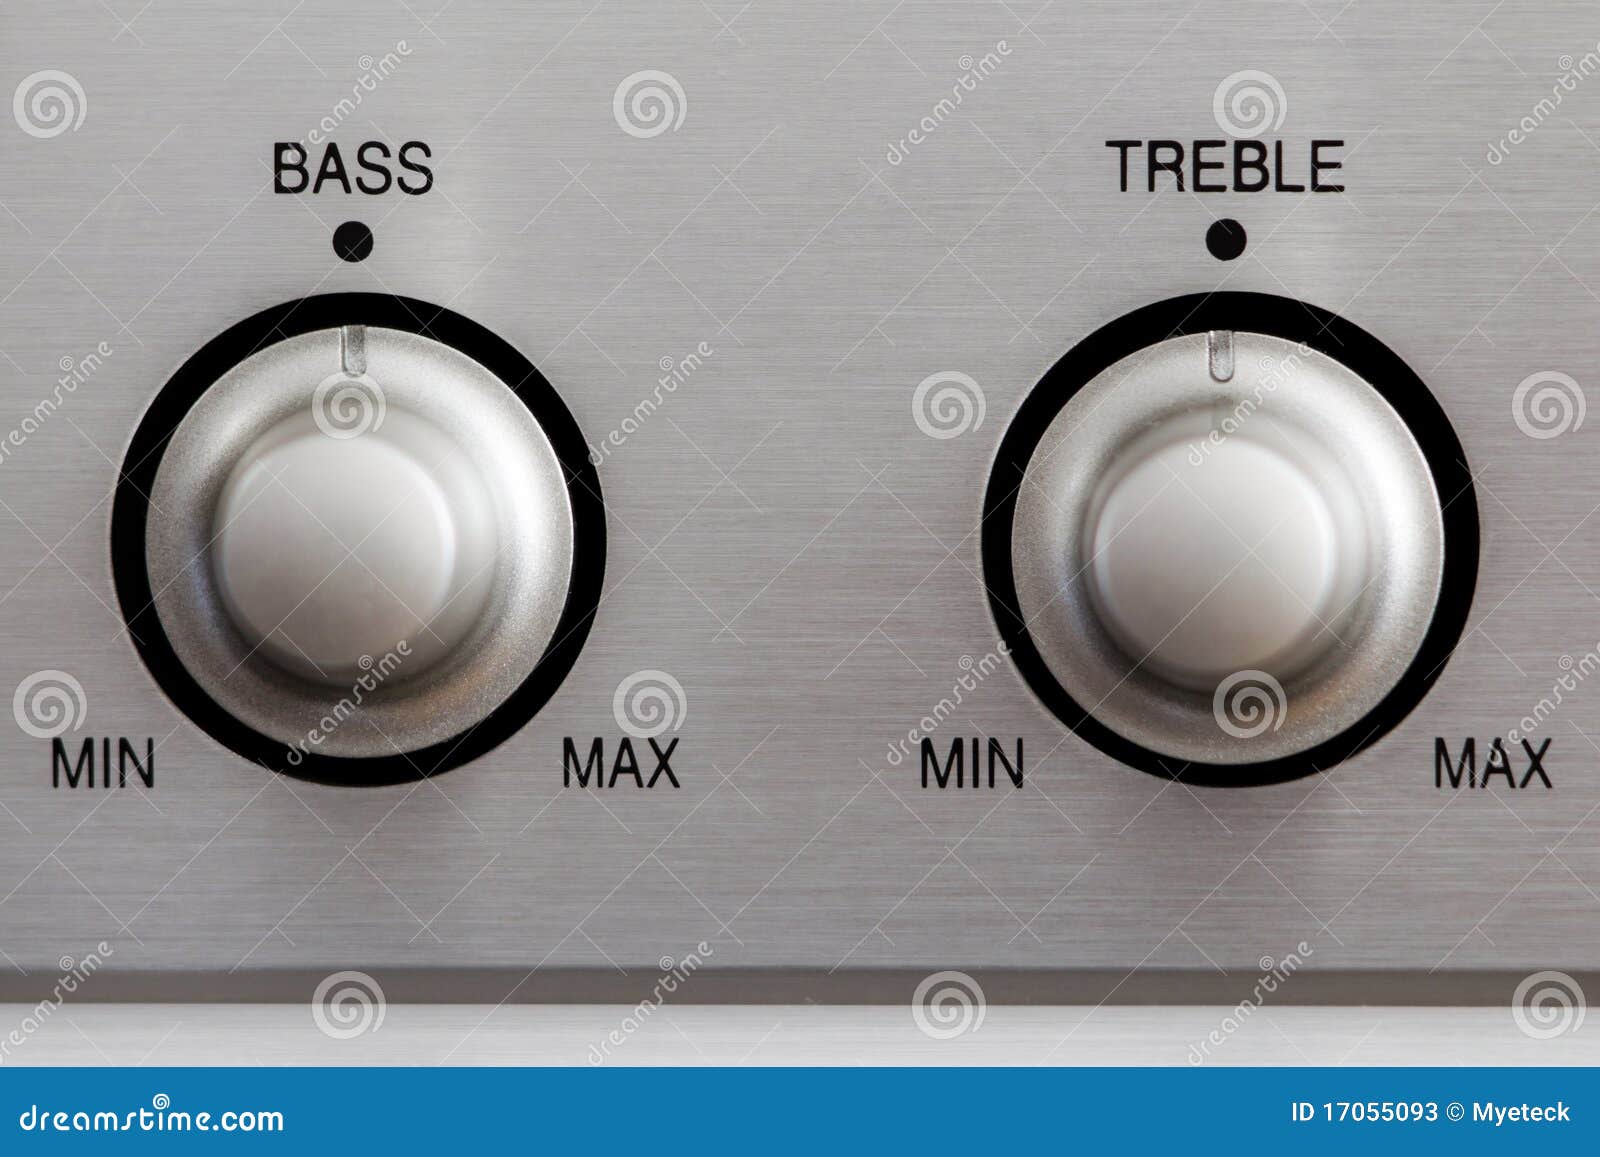 bass and treble knobs